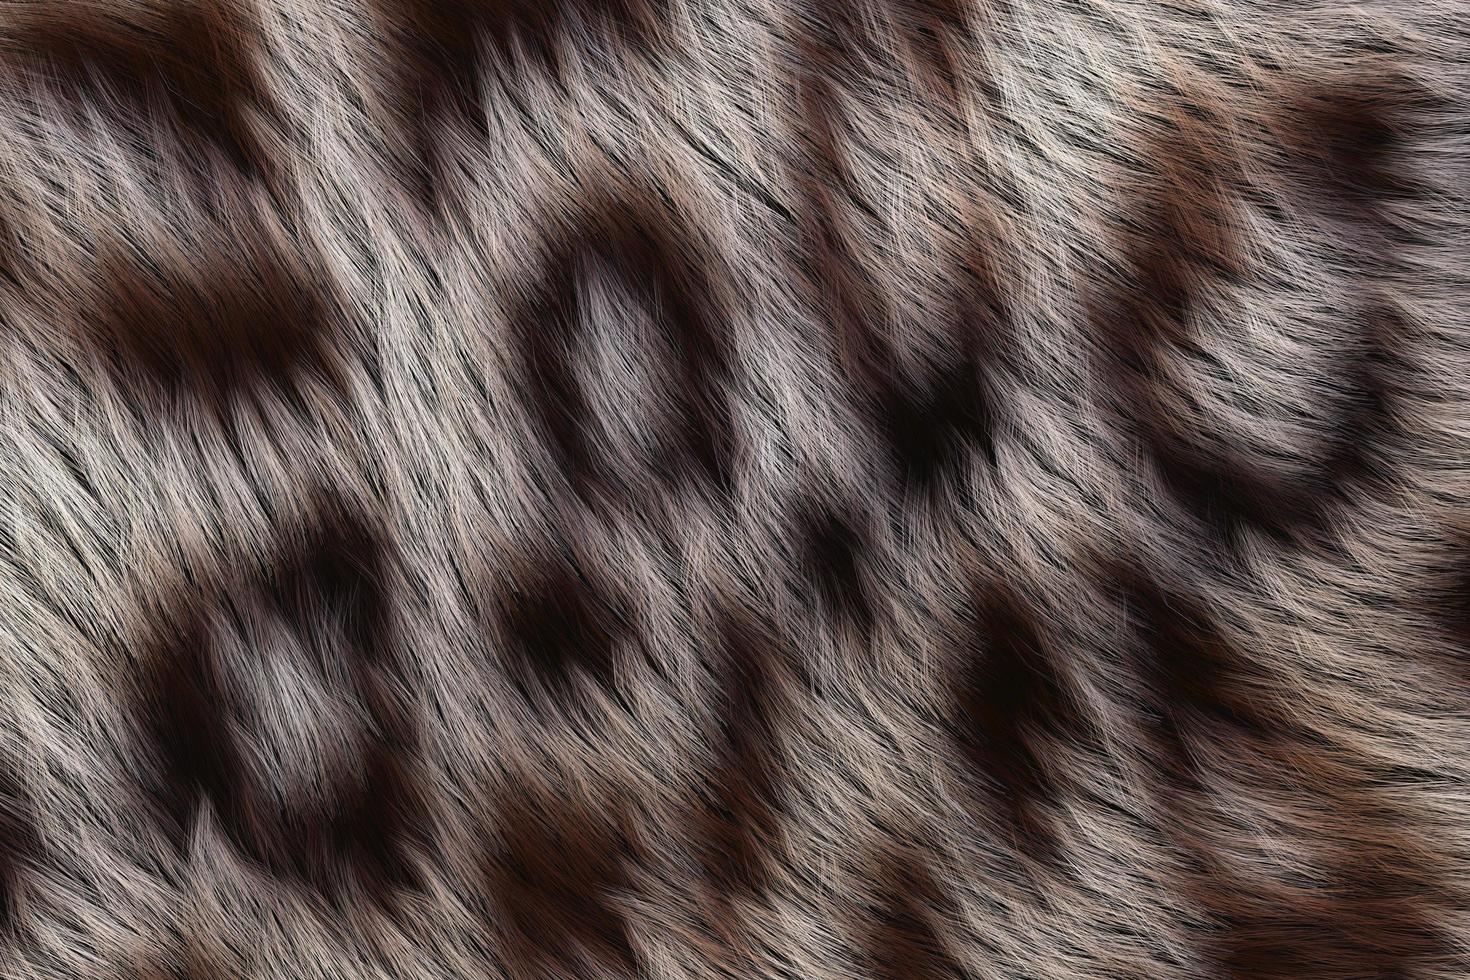 Macro wild animal texture. Abstract wool background. 3D rendering photo